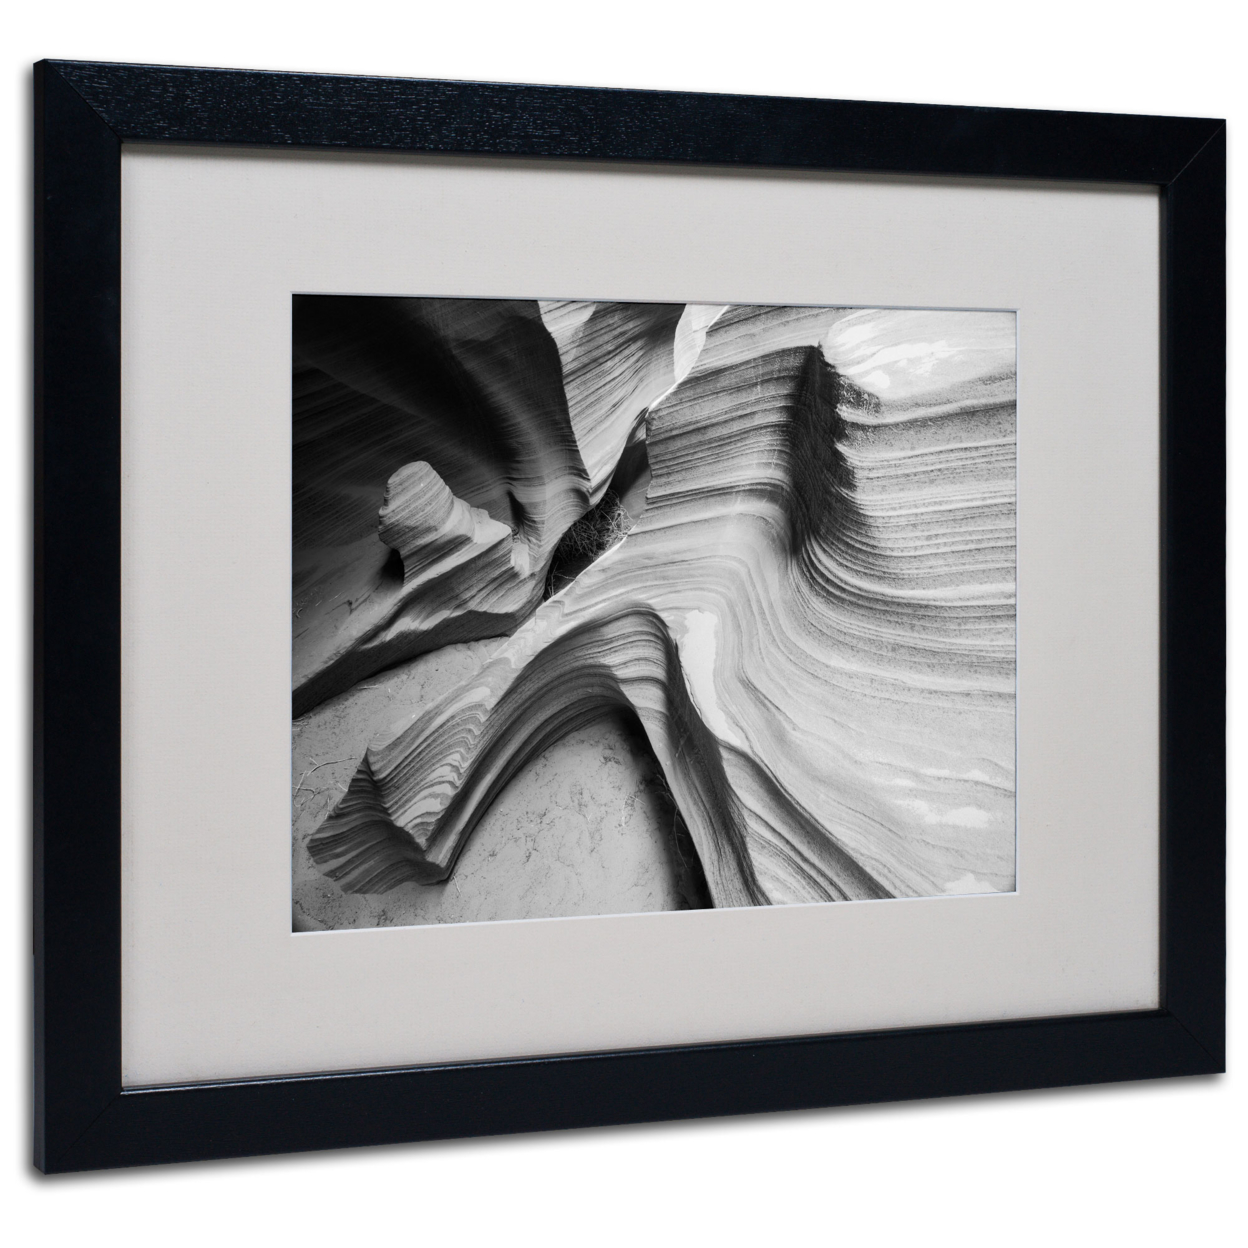 Moises Levy 'Snake Canyon' Black Wooden Framed Art 18 X 22 Inches